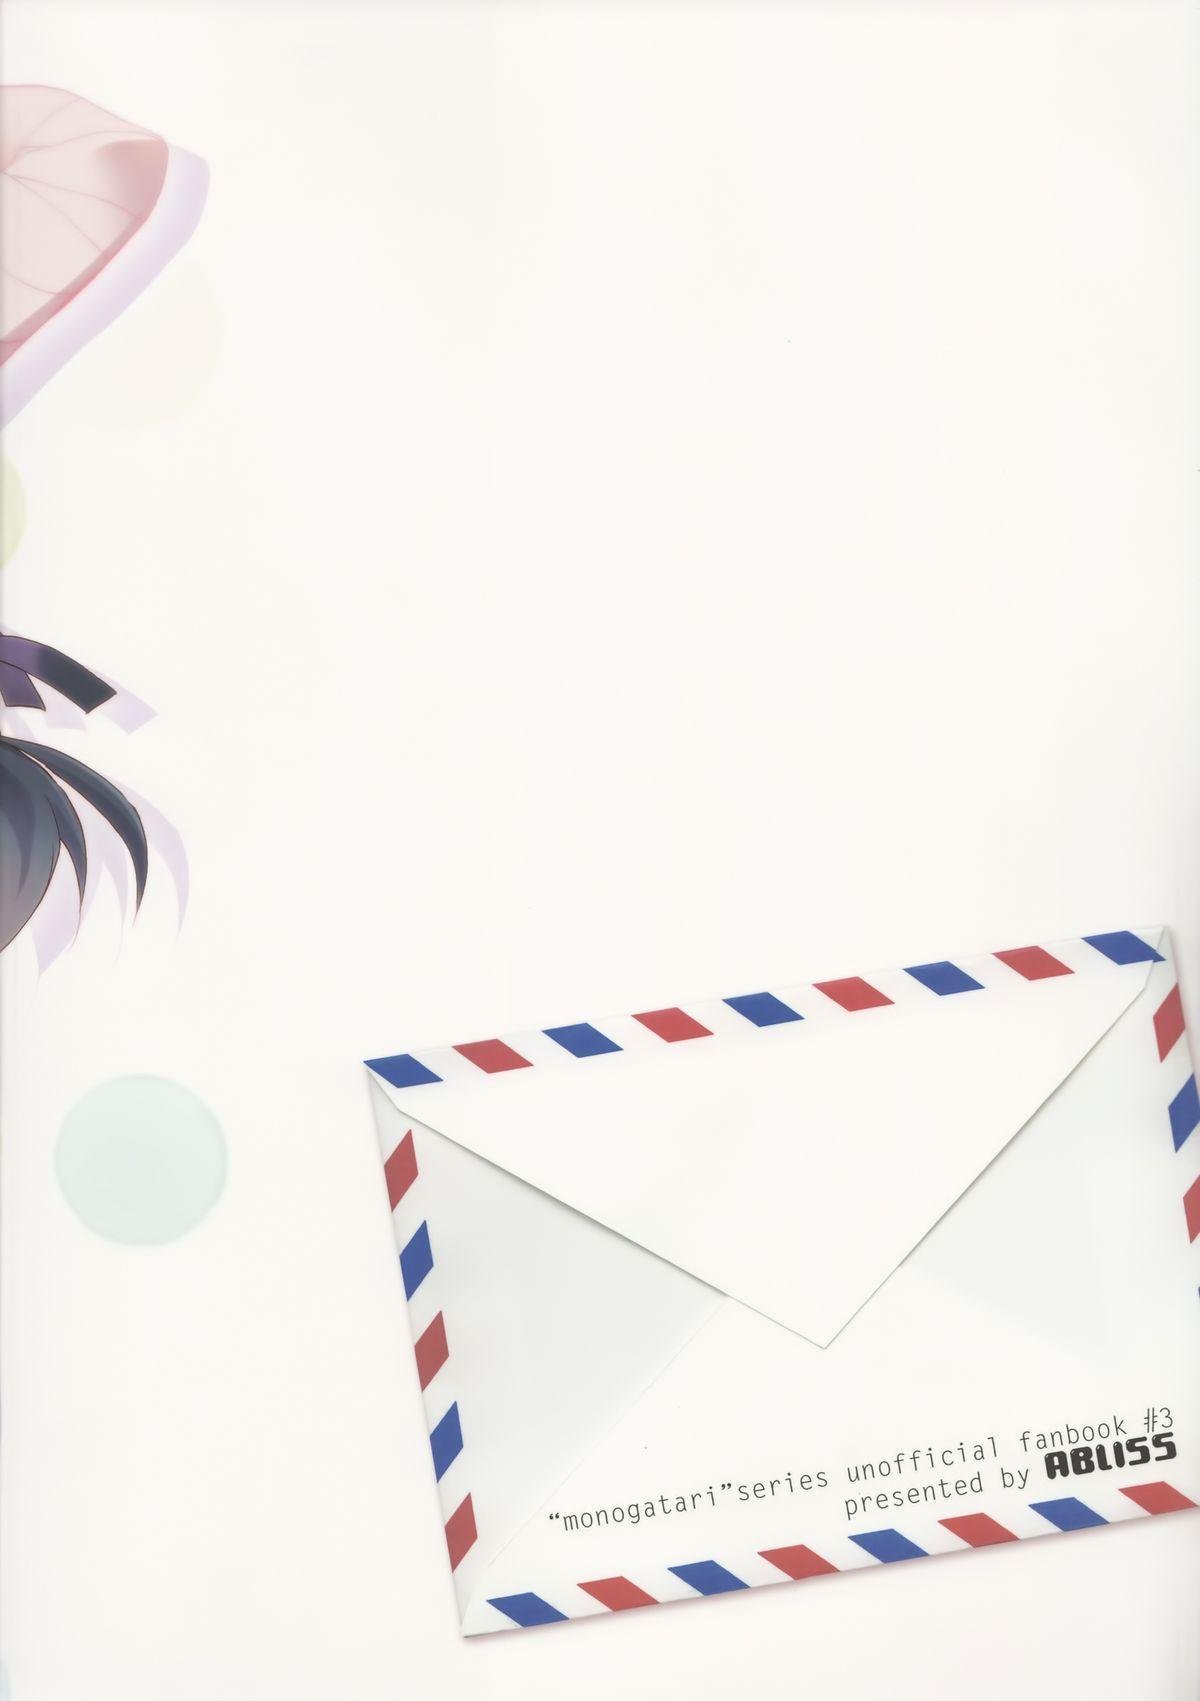 Once And For All Monogatari Series Unofficial Fanbook #3 - 20